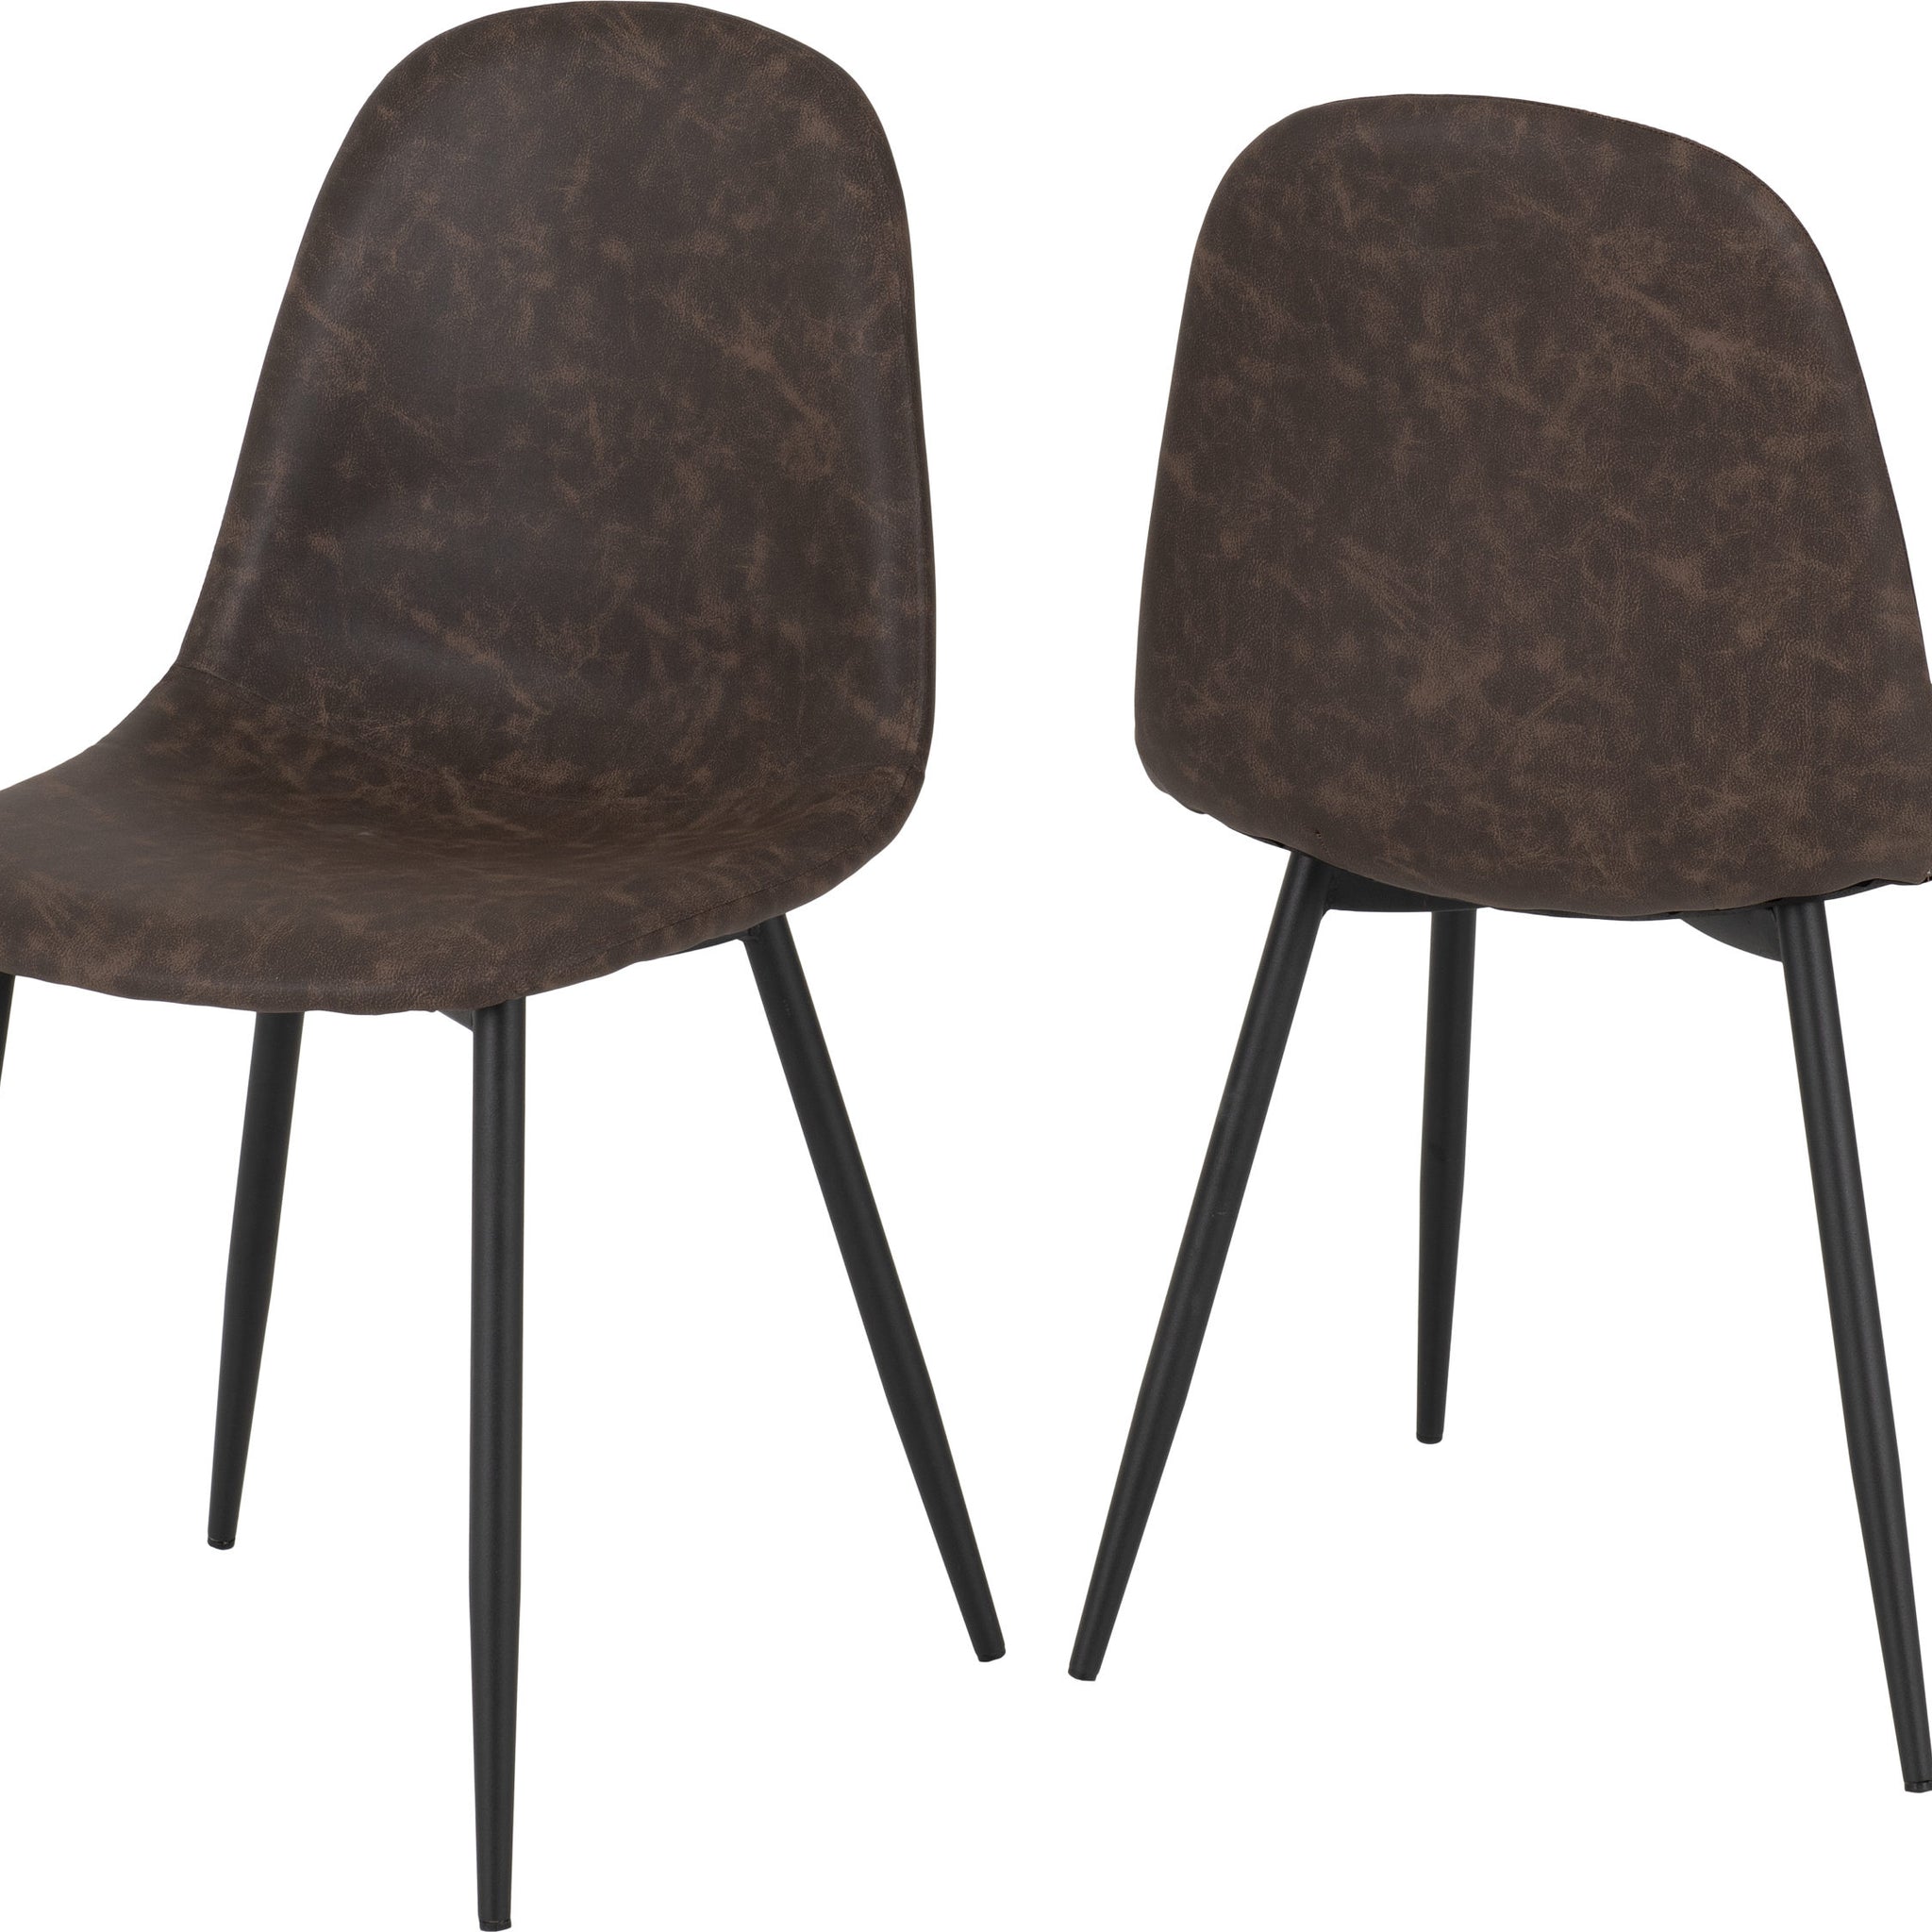 Athens Chair Brown Faux Leather (Pair)- The Right Buy Store